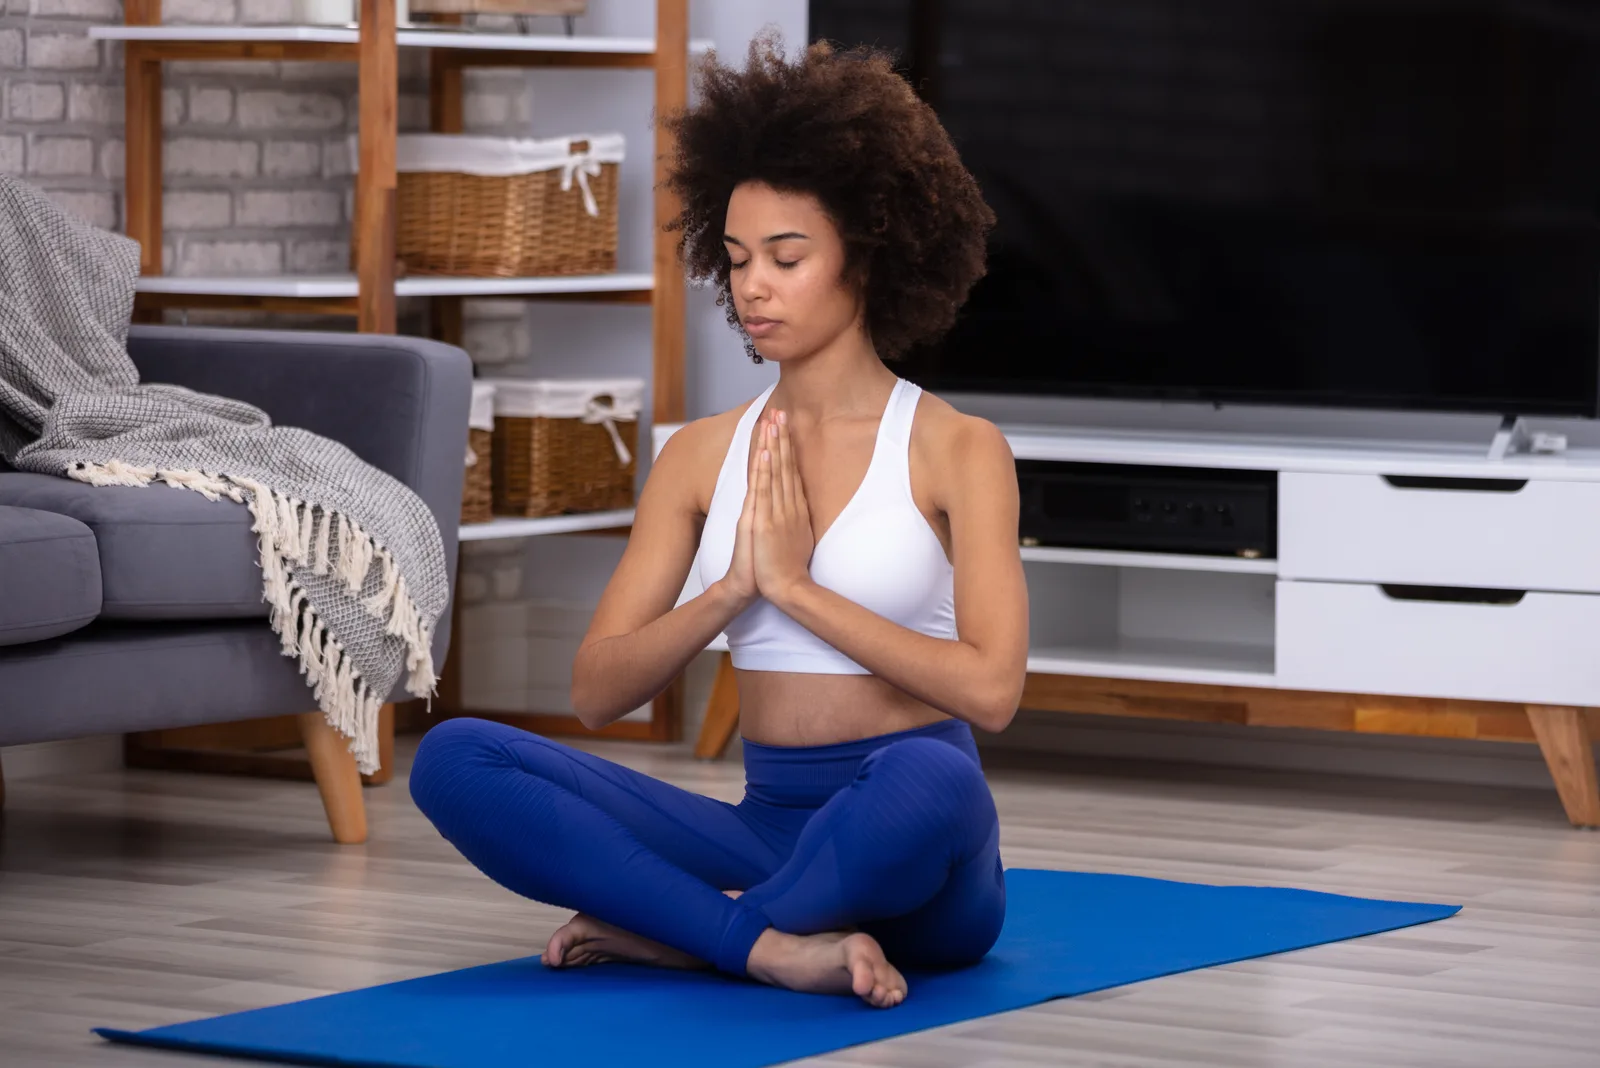 the woman is meditating at home